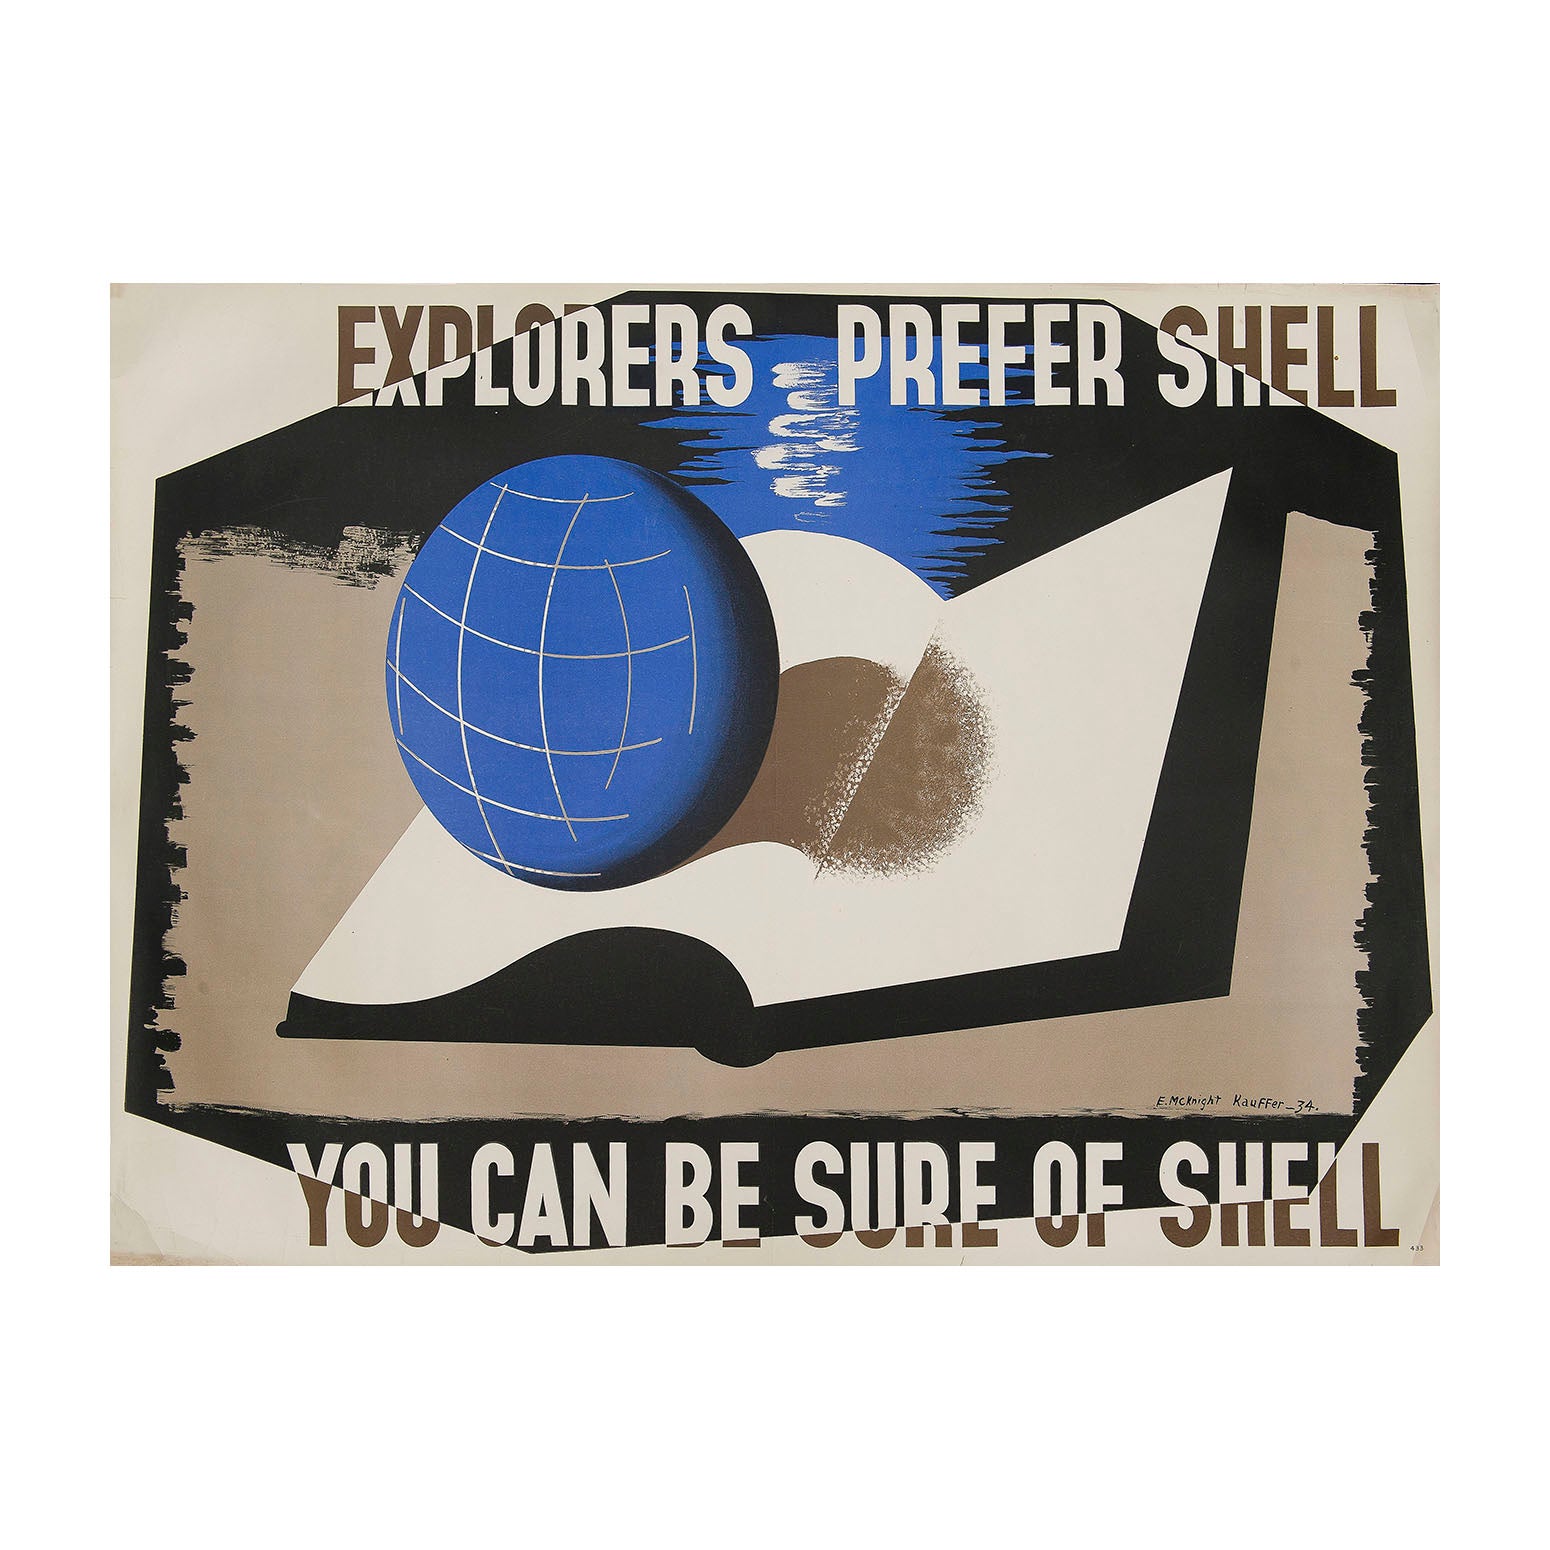 Original poster: You Can Be Sure of Shell, Explorer’s Prefer Shell, designed by Edward McKnight Kauffer, 1934. Modernist-inspired style to represent an open map book or travel journal superimposed with a blue globe against an abstract background